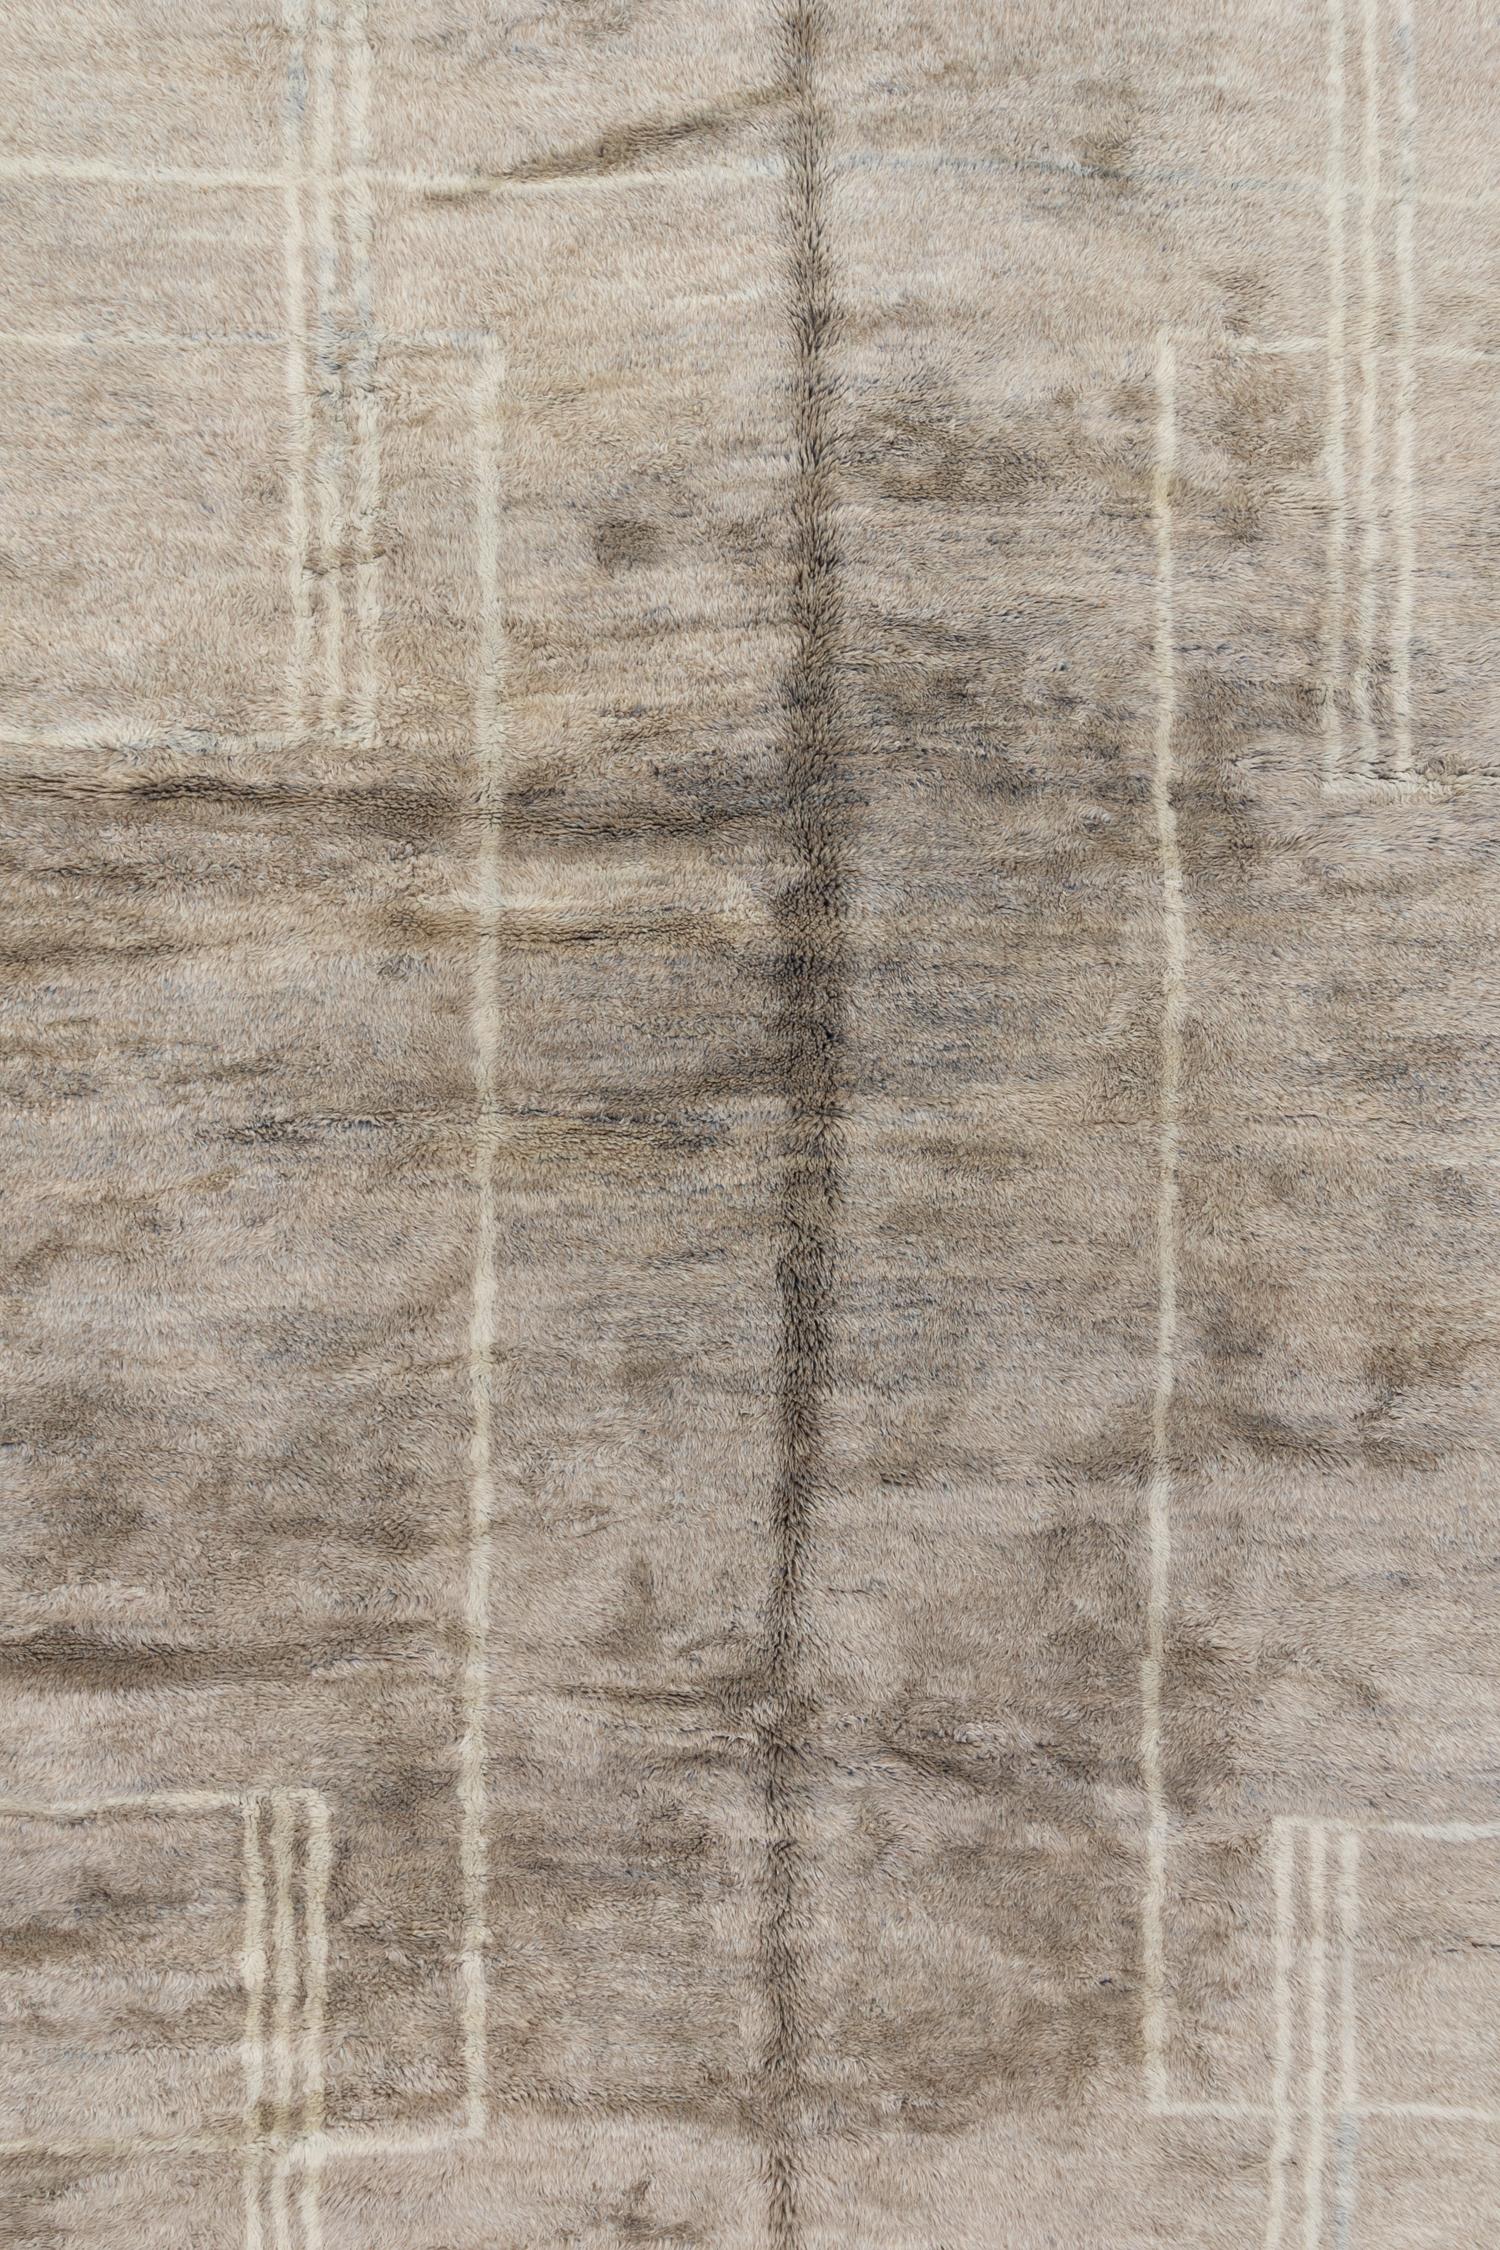 This Moroccan rug is crafted with wool from the Altas Mountains and offers a luxuriously soft texture and superior quality. It was hand woven in Morocco using traditional techniques and features a warm taupe field with subtle striped accents.

